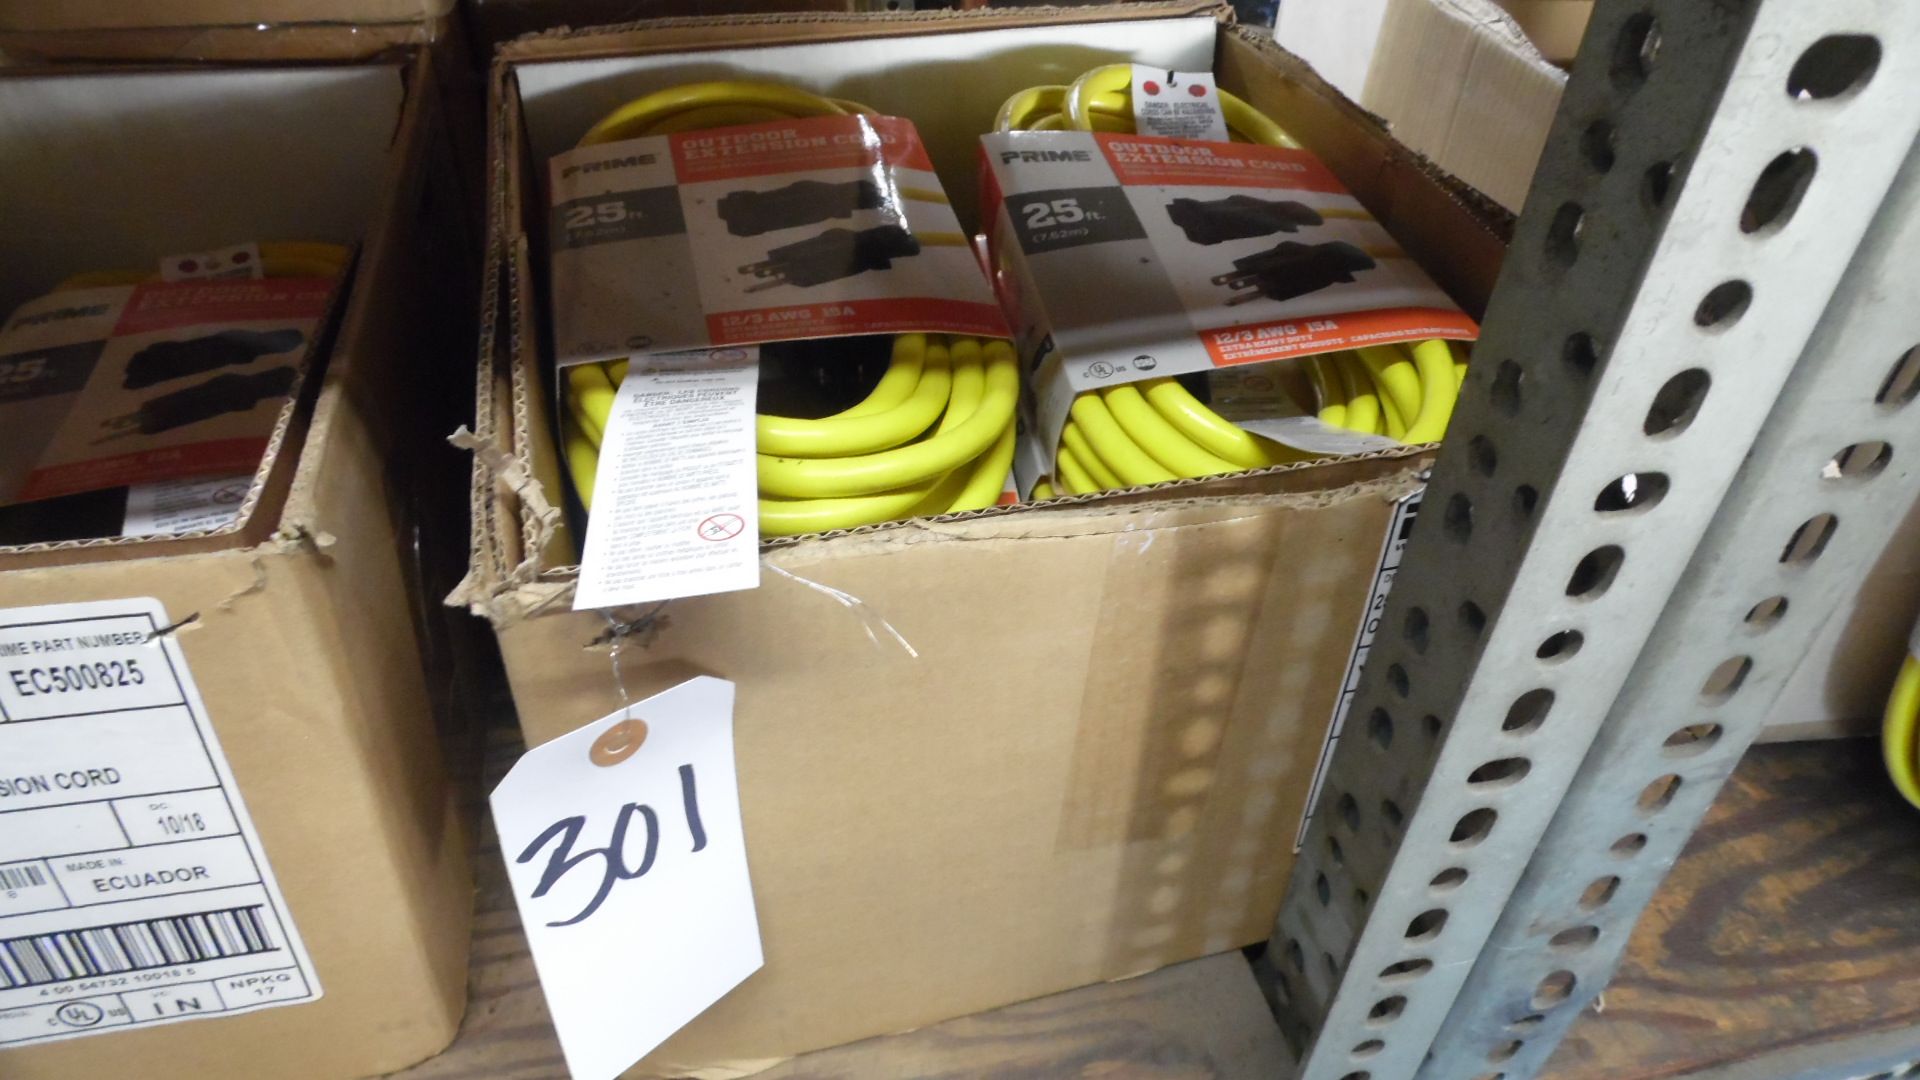 CASE OF 25 FT. EXTENSION CORDS